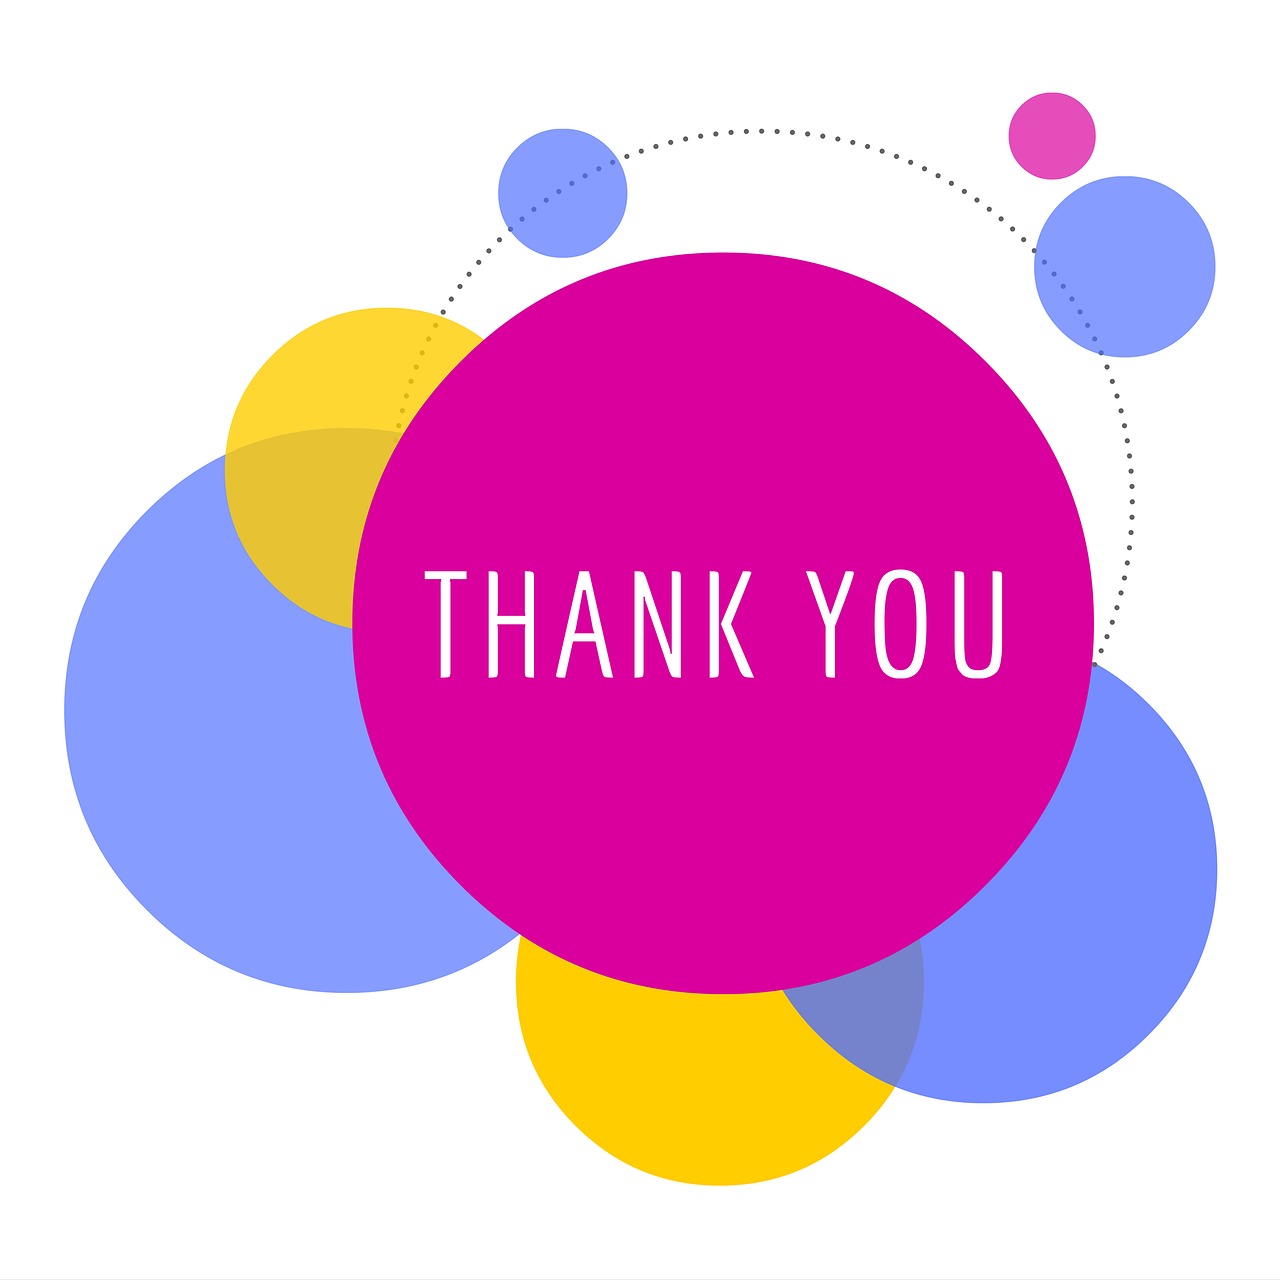 Thank You Message in Colorful Bubbles